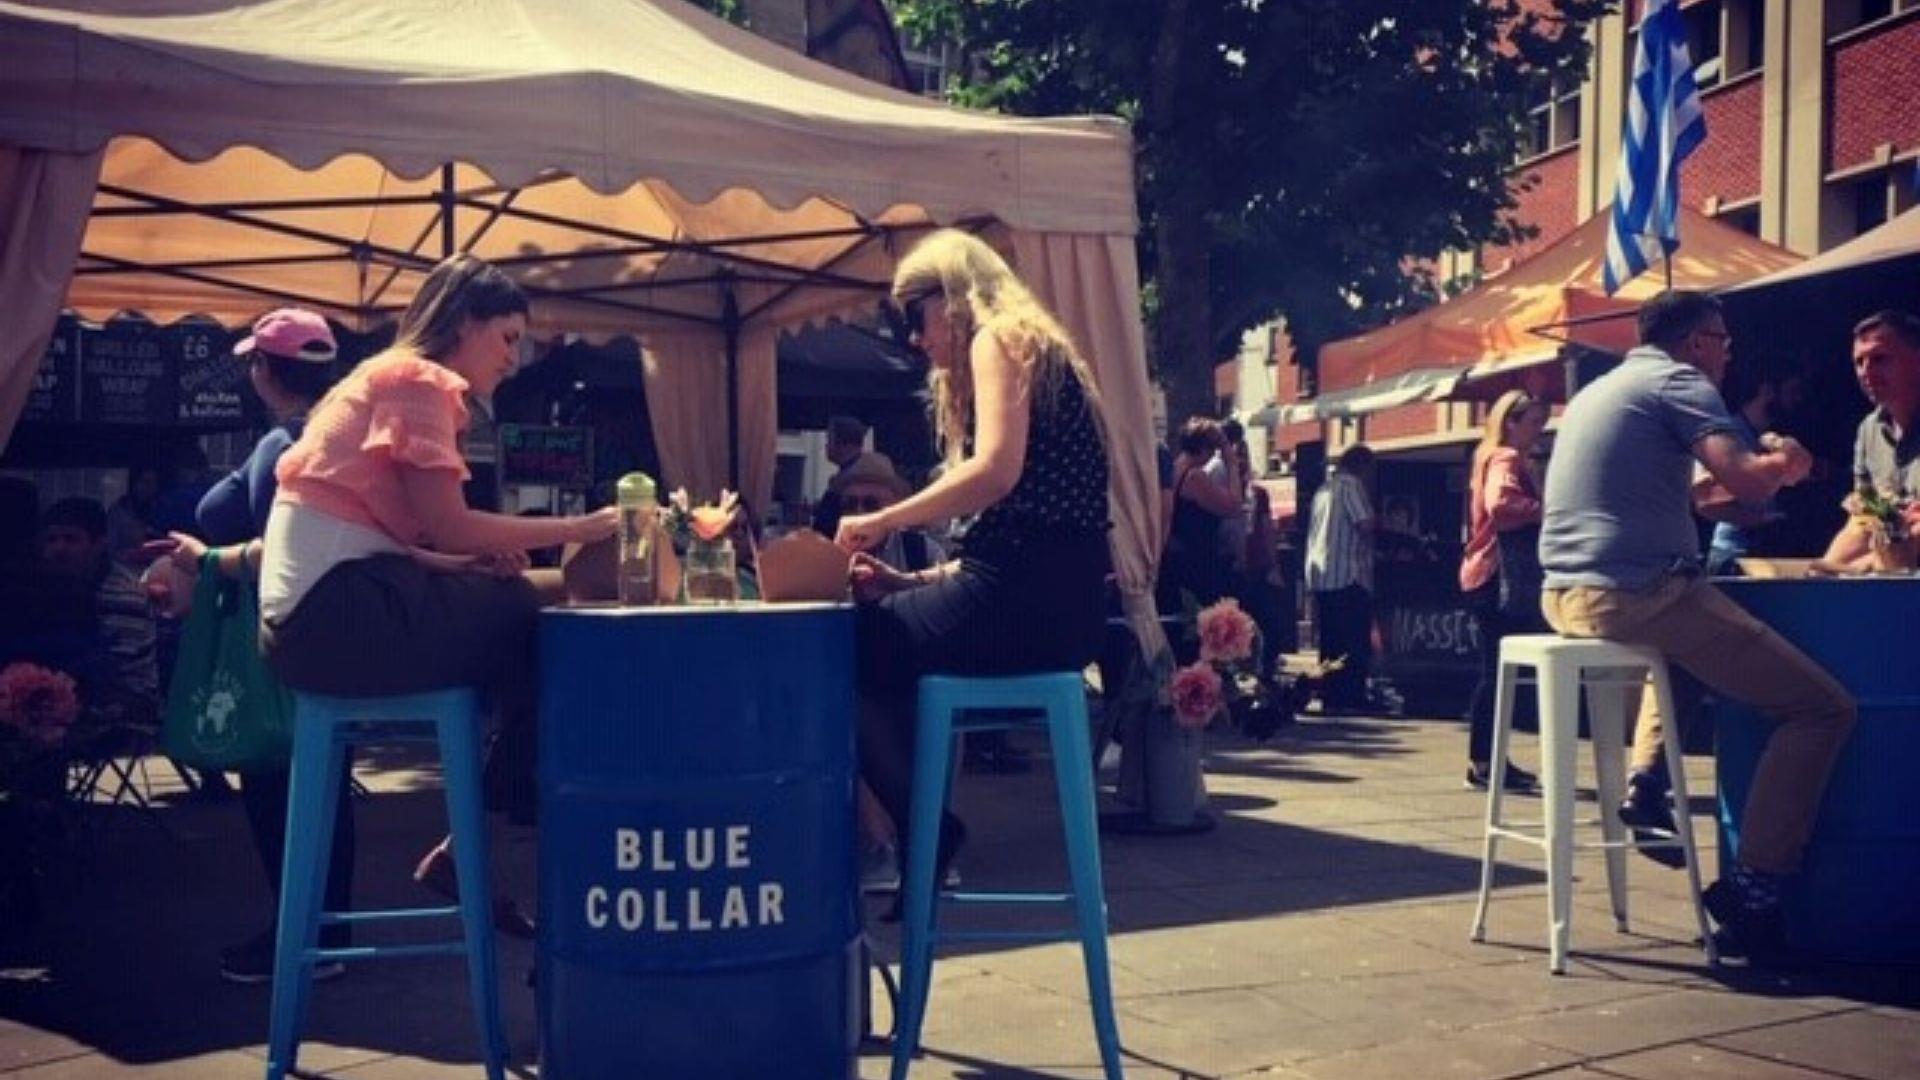 Two ladies eating street food at Blue Collar market in Reading